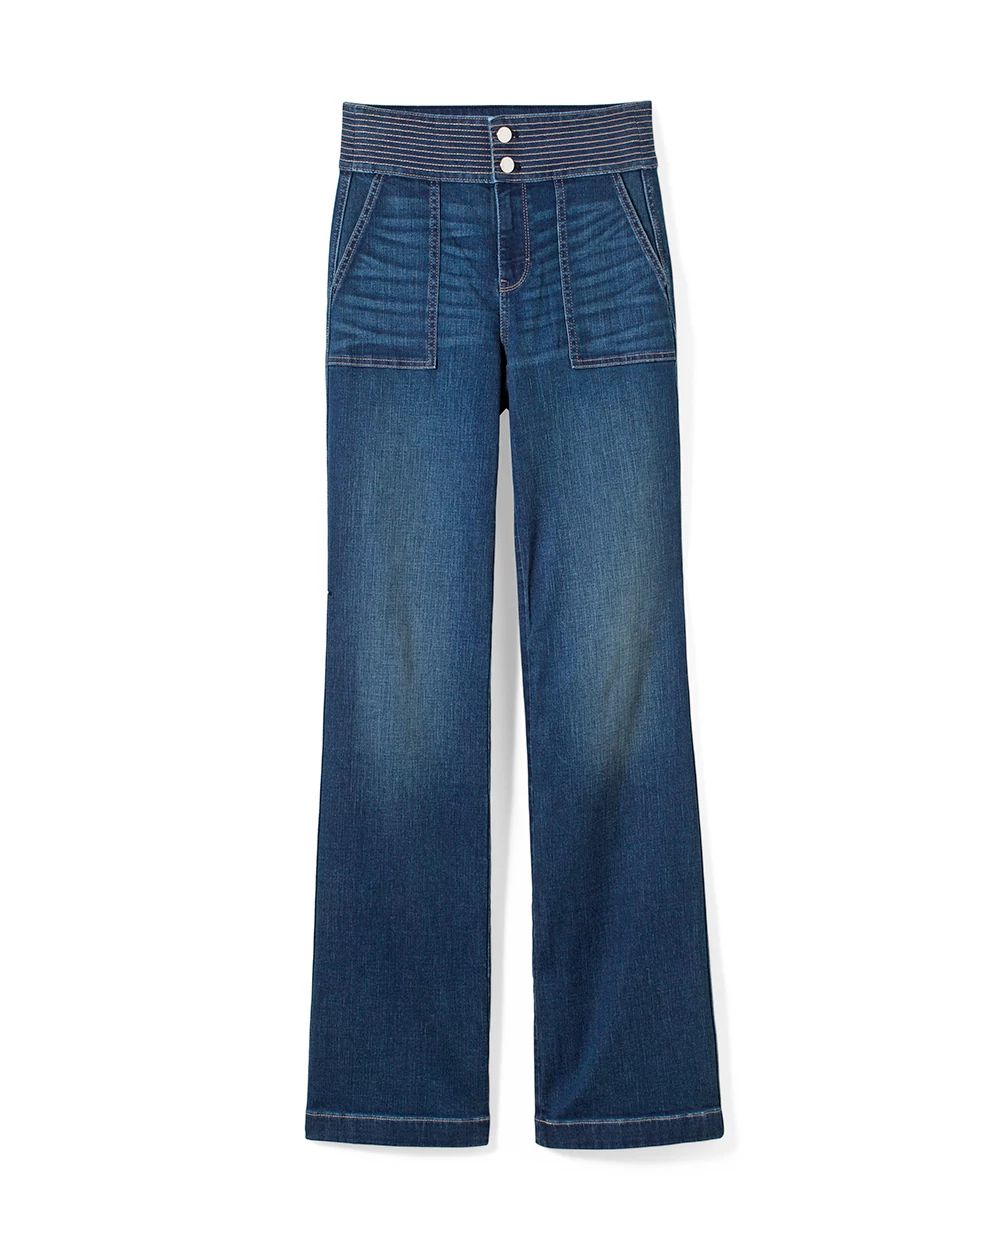 Extra High-Rise Everyday Soft Denim™ Trupunto Trouser Jeans click to view larger image.